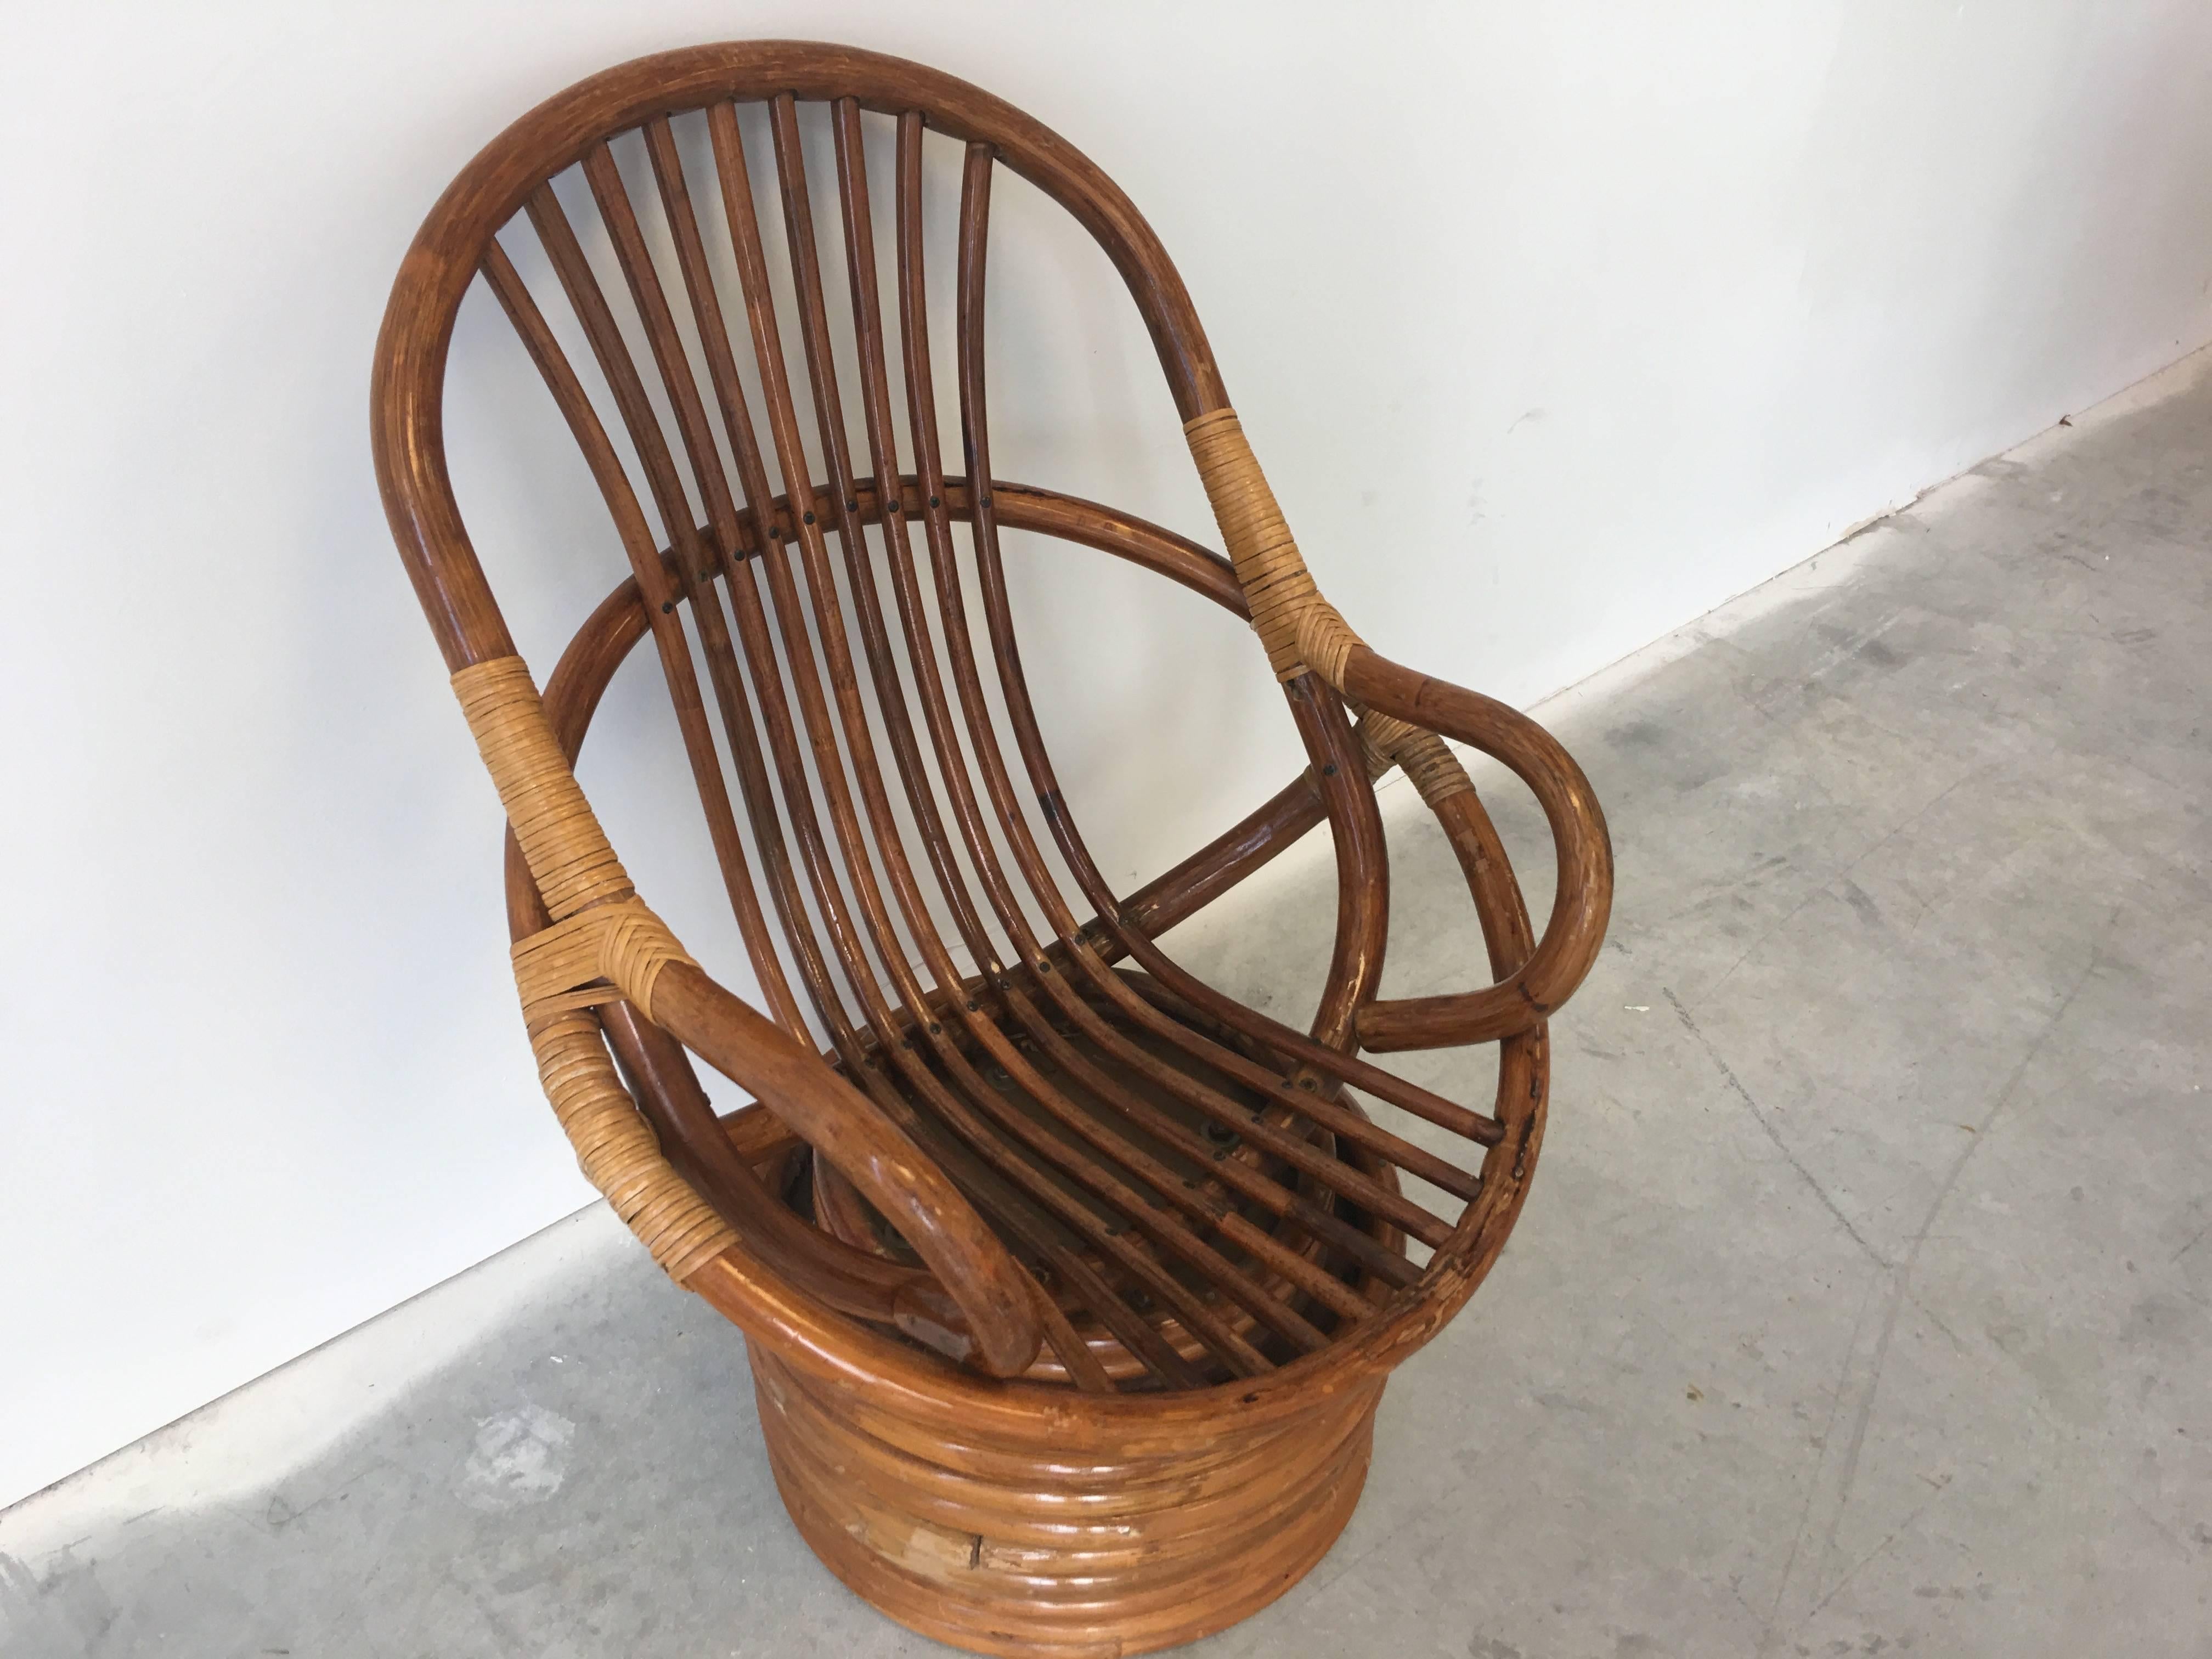 Offered is a beautiful, Palm Beach style 1950s children's rattan swivel chair.